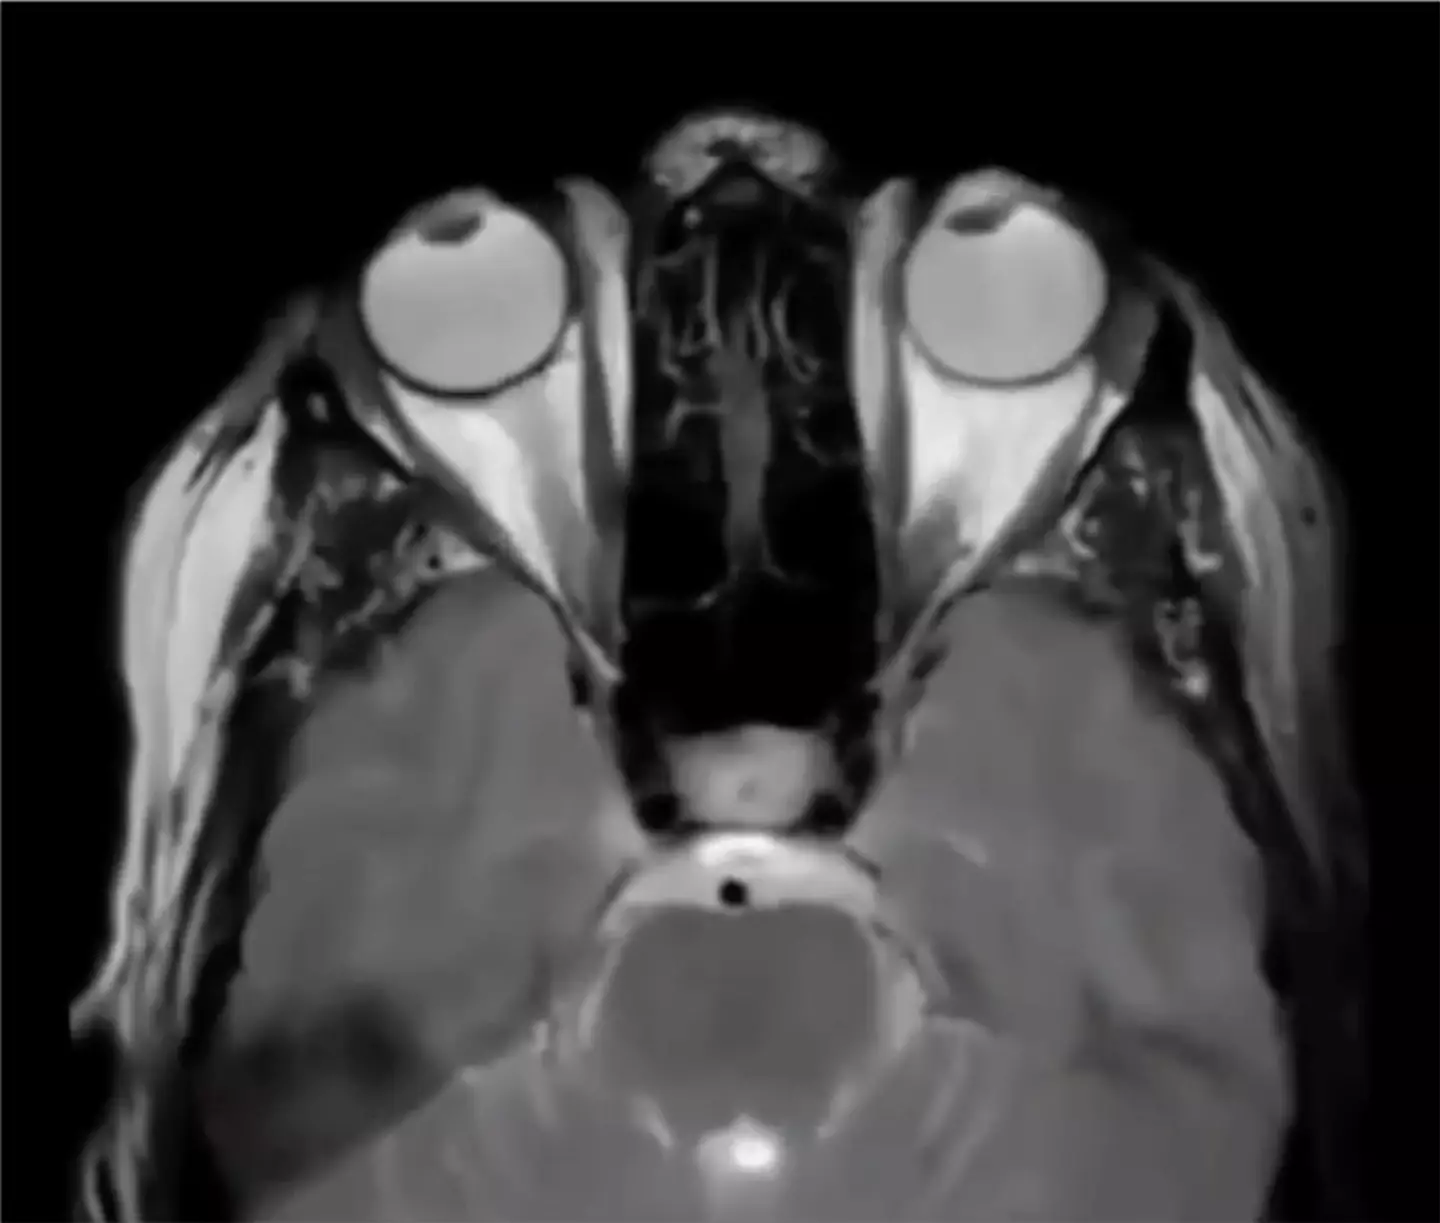 The video appears to show someone in REM sleep during an MRI scan (Reddit/@immatureboy7)